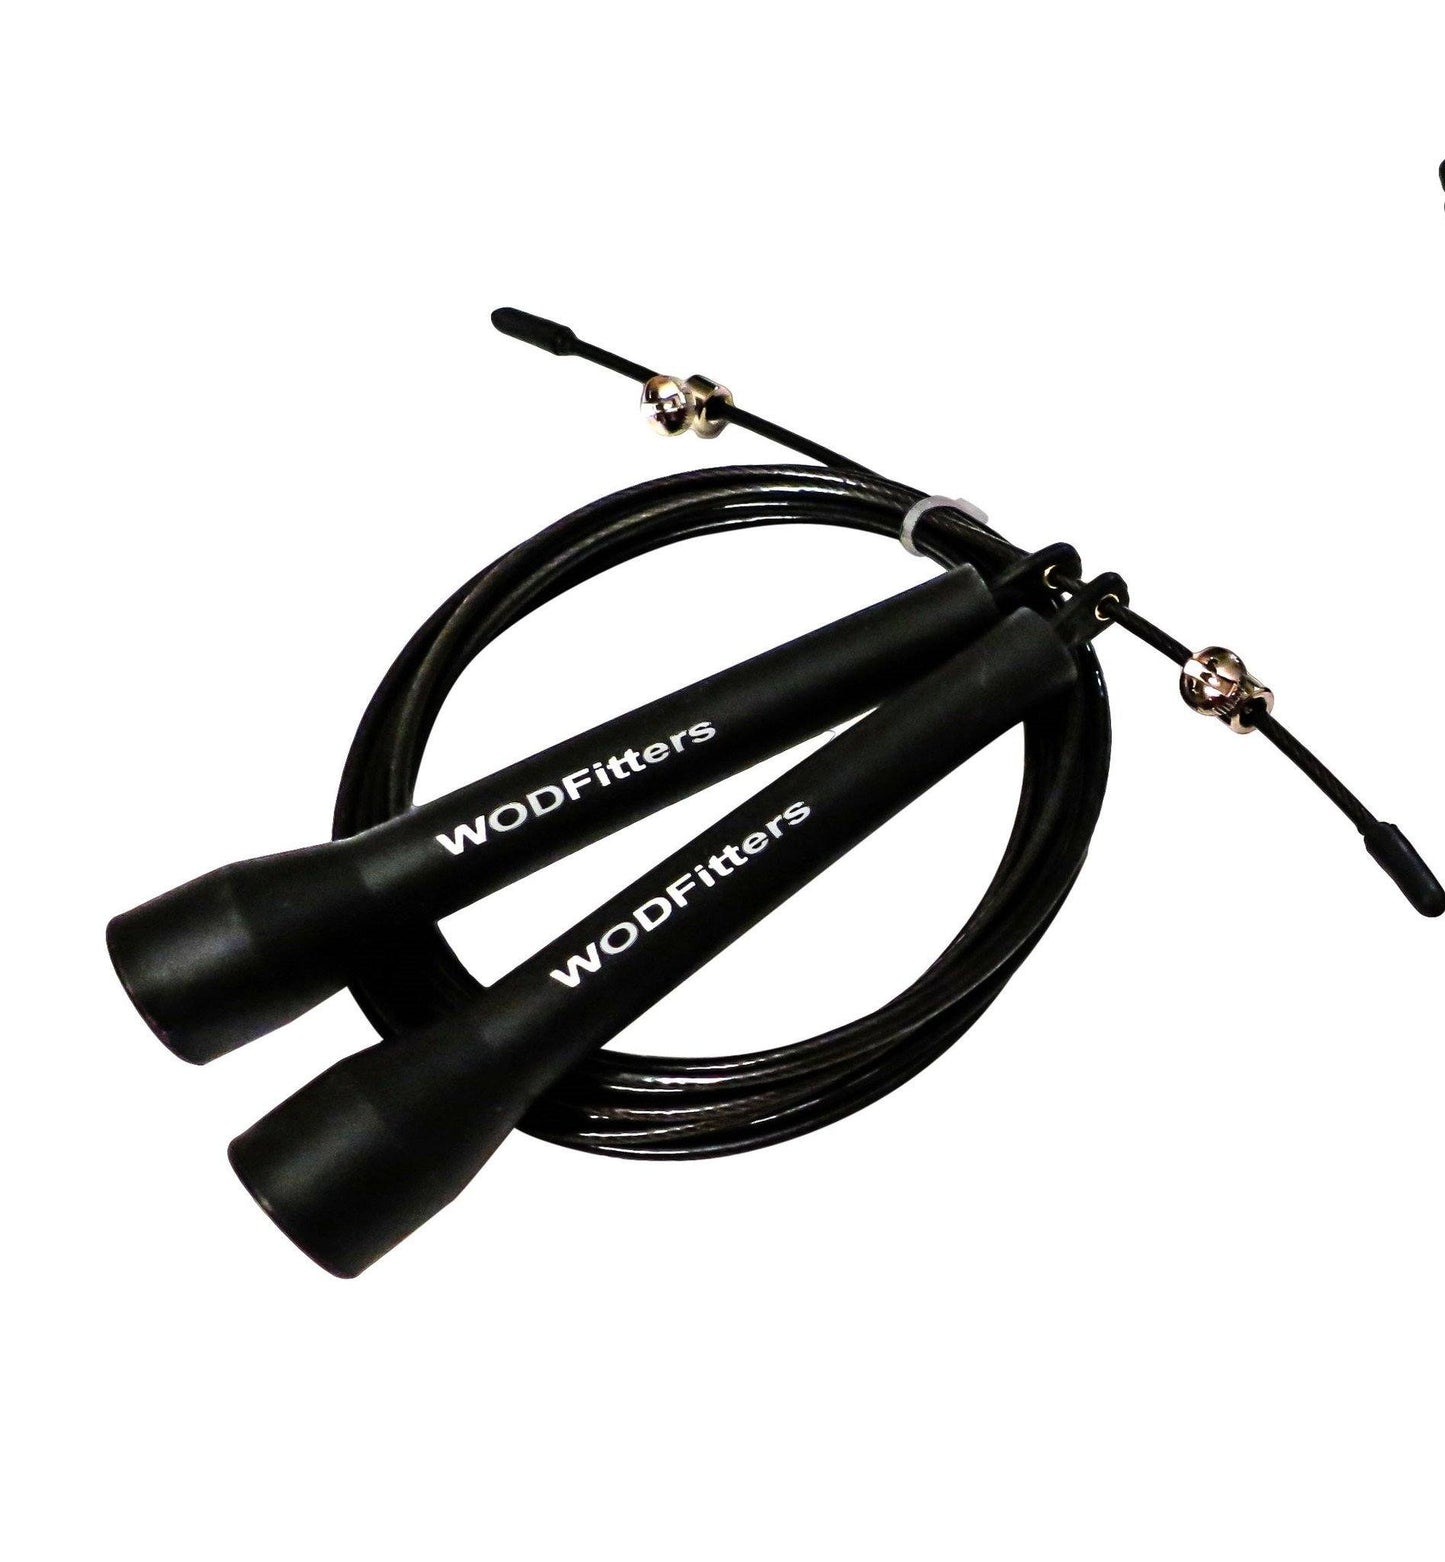 FREE WODFitters Speed Rope * Just Pay $5.95 Shipping & Handling * Limited Time Offer! 